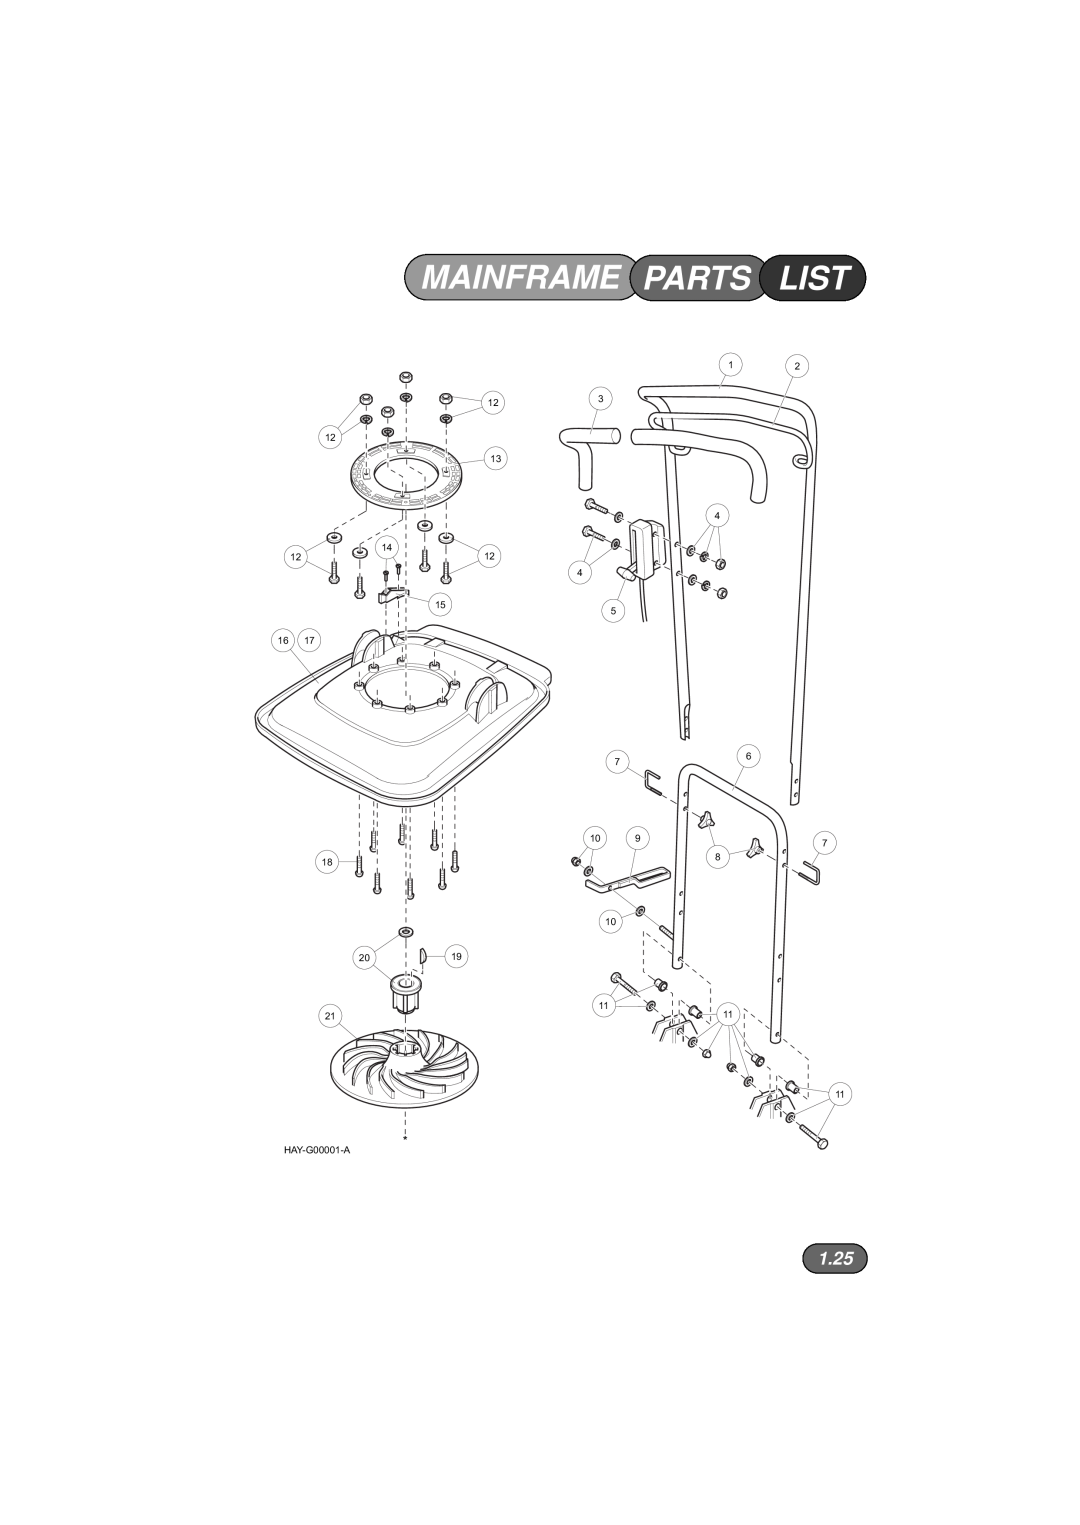 Hayter Mowers 453, 450, 446 Hovertrim manual Mainframe Parts List, 1.25, HAY-G00001-A 